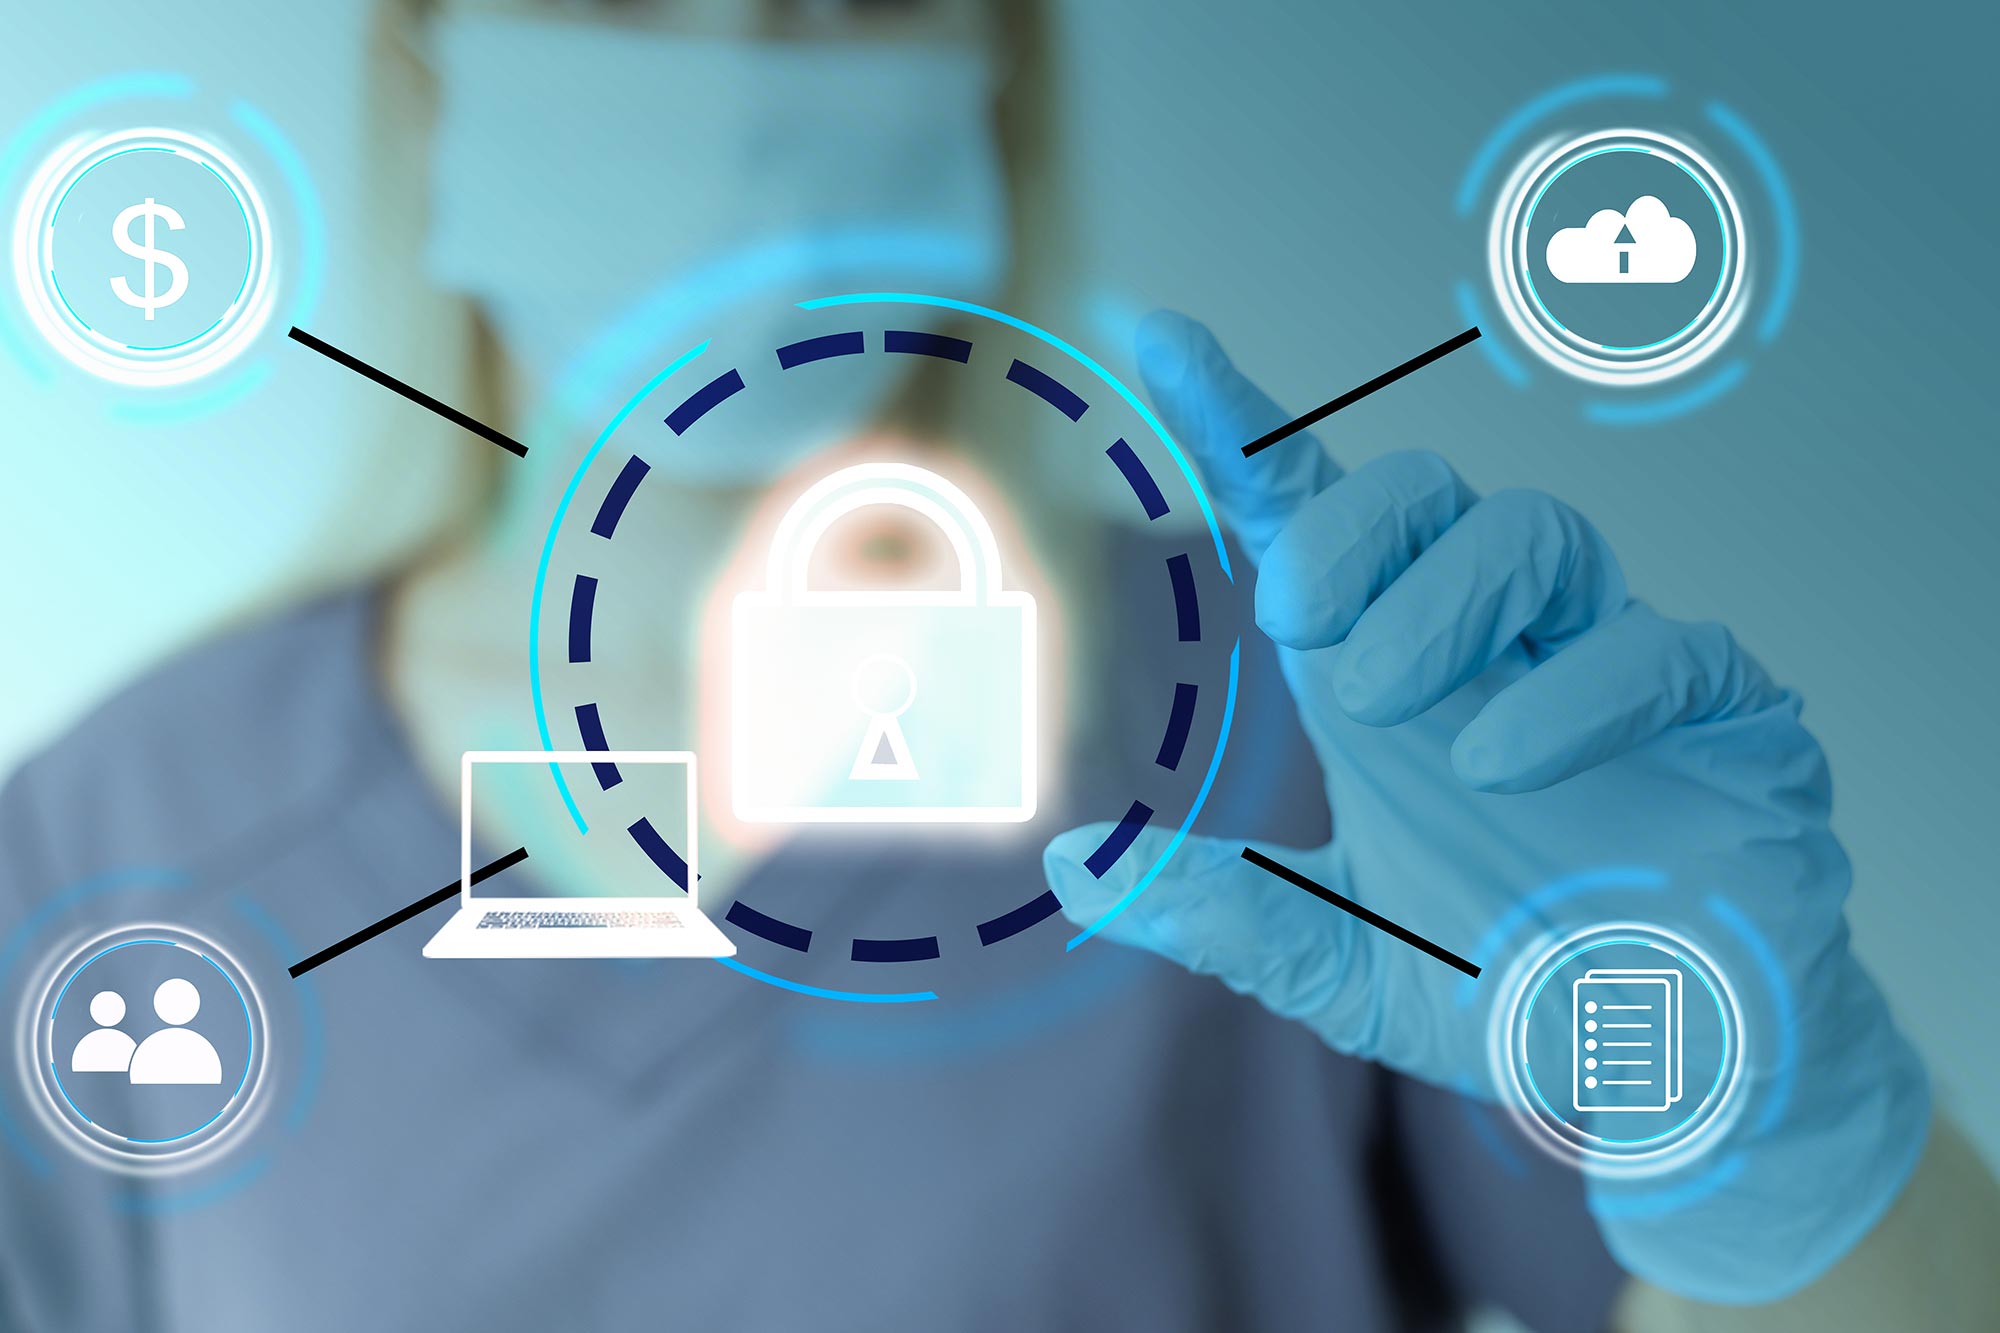 The urgent need for effective cybersecurity in healthcare